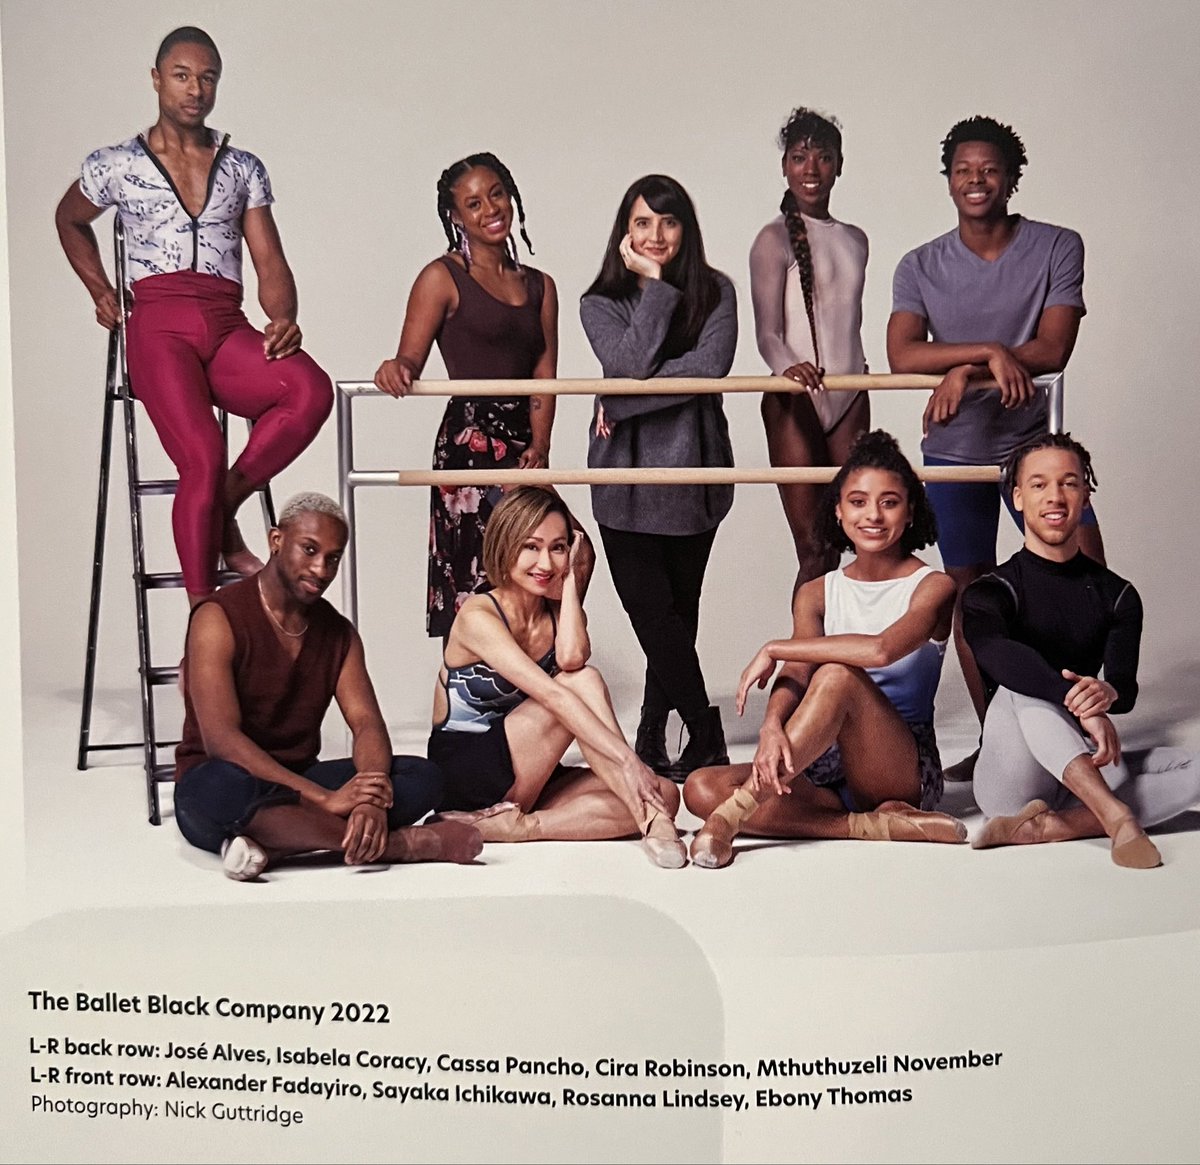 So fortunate to come & see @BalletBlack at @RoyalOperaHouse this evening! 🎉 Wonderful! 🎉 Valuing #DiversityandInclusion Brought tears to my eyes, and a big smile, made me think of my Dad who loved to dance 🥰Well done patrons @ThandiweNewton & @kwamekweiarmah. @IWFUKwomen